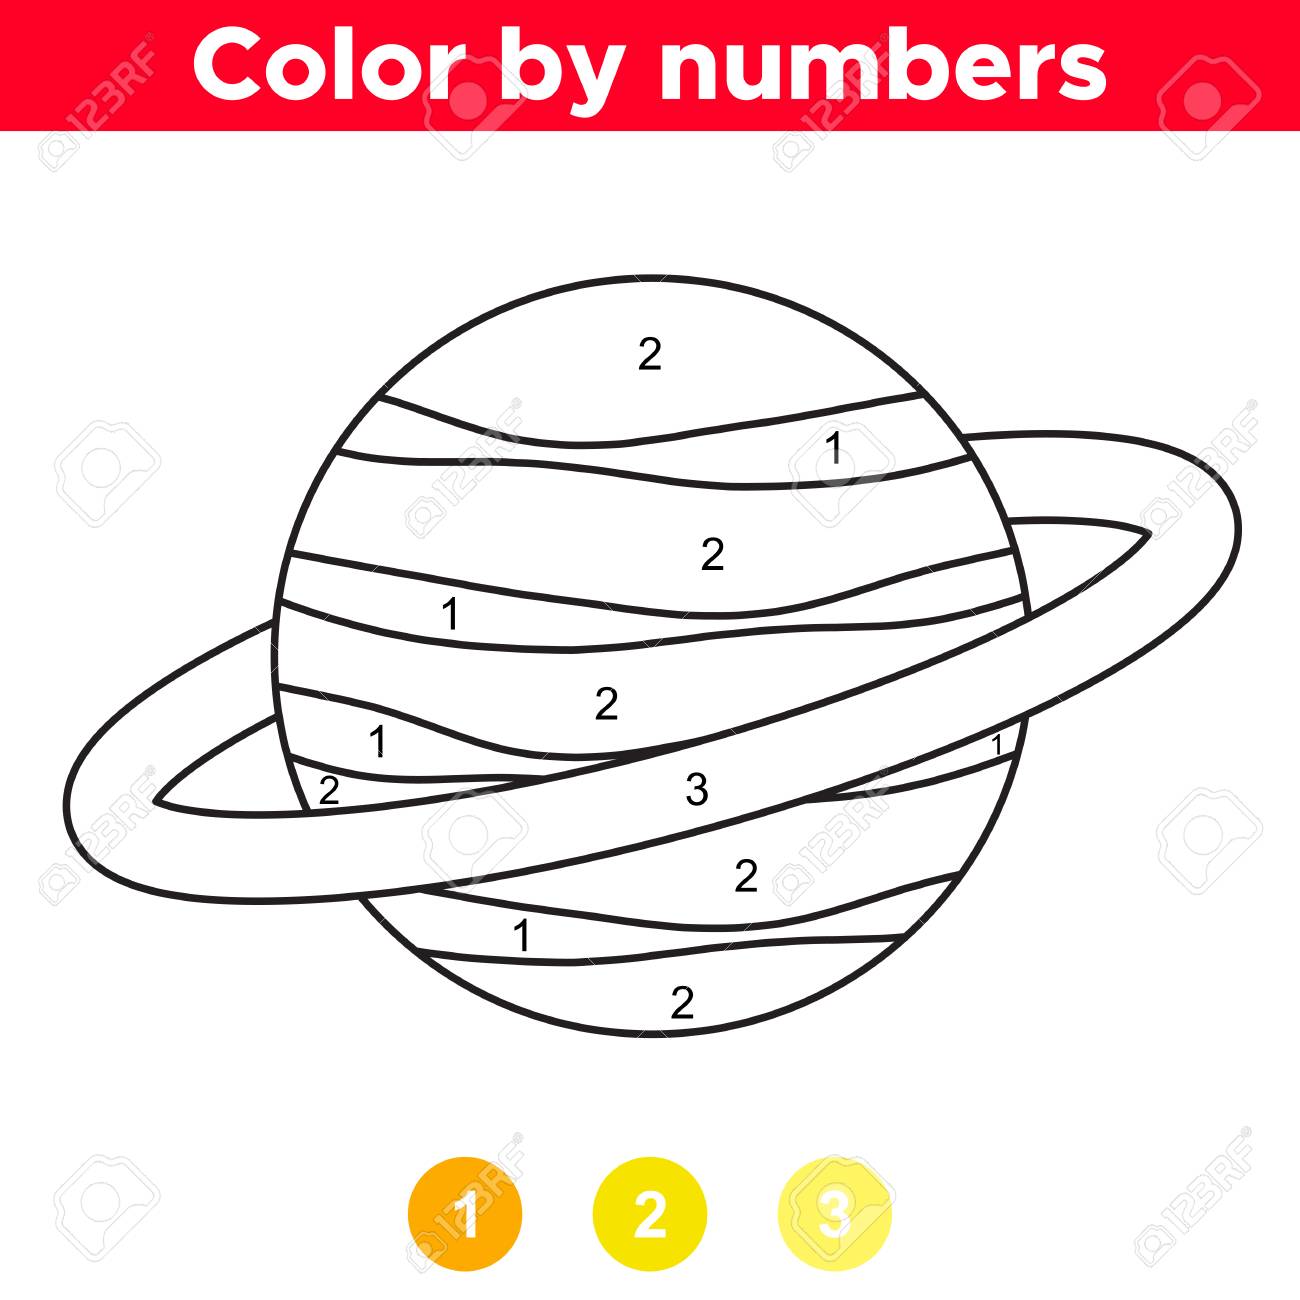 Color by number for preschool and school kids coloring page or book with saturn solar system space theme vector illustration royalty free svg cliparts vectors and stock illustration image